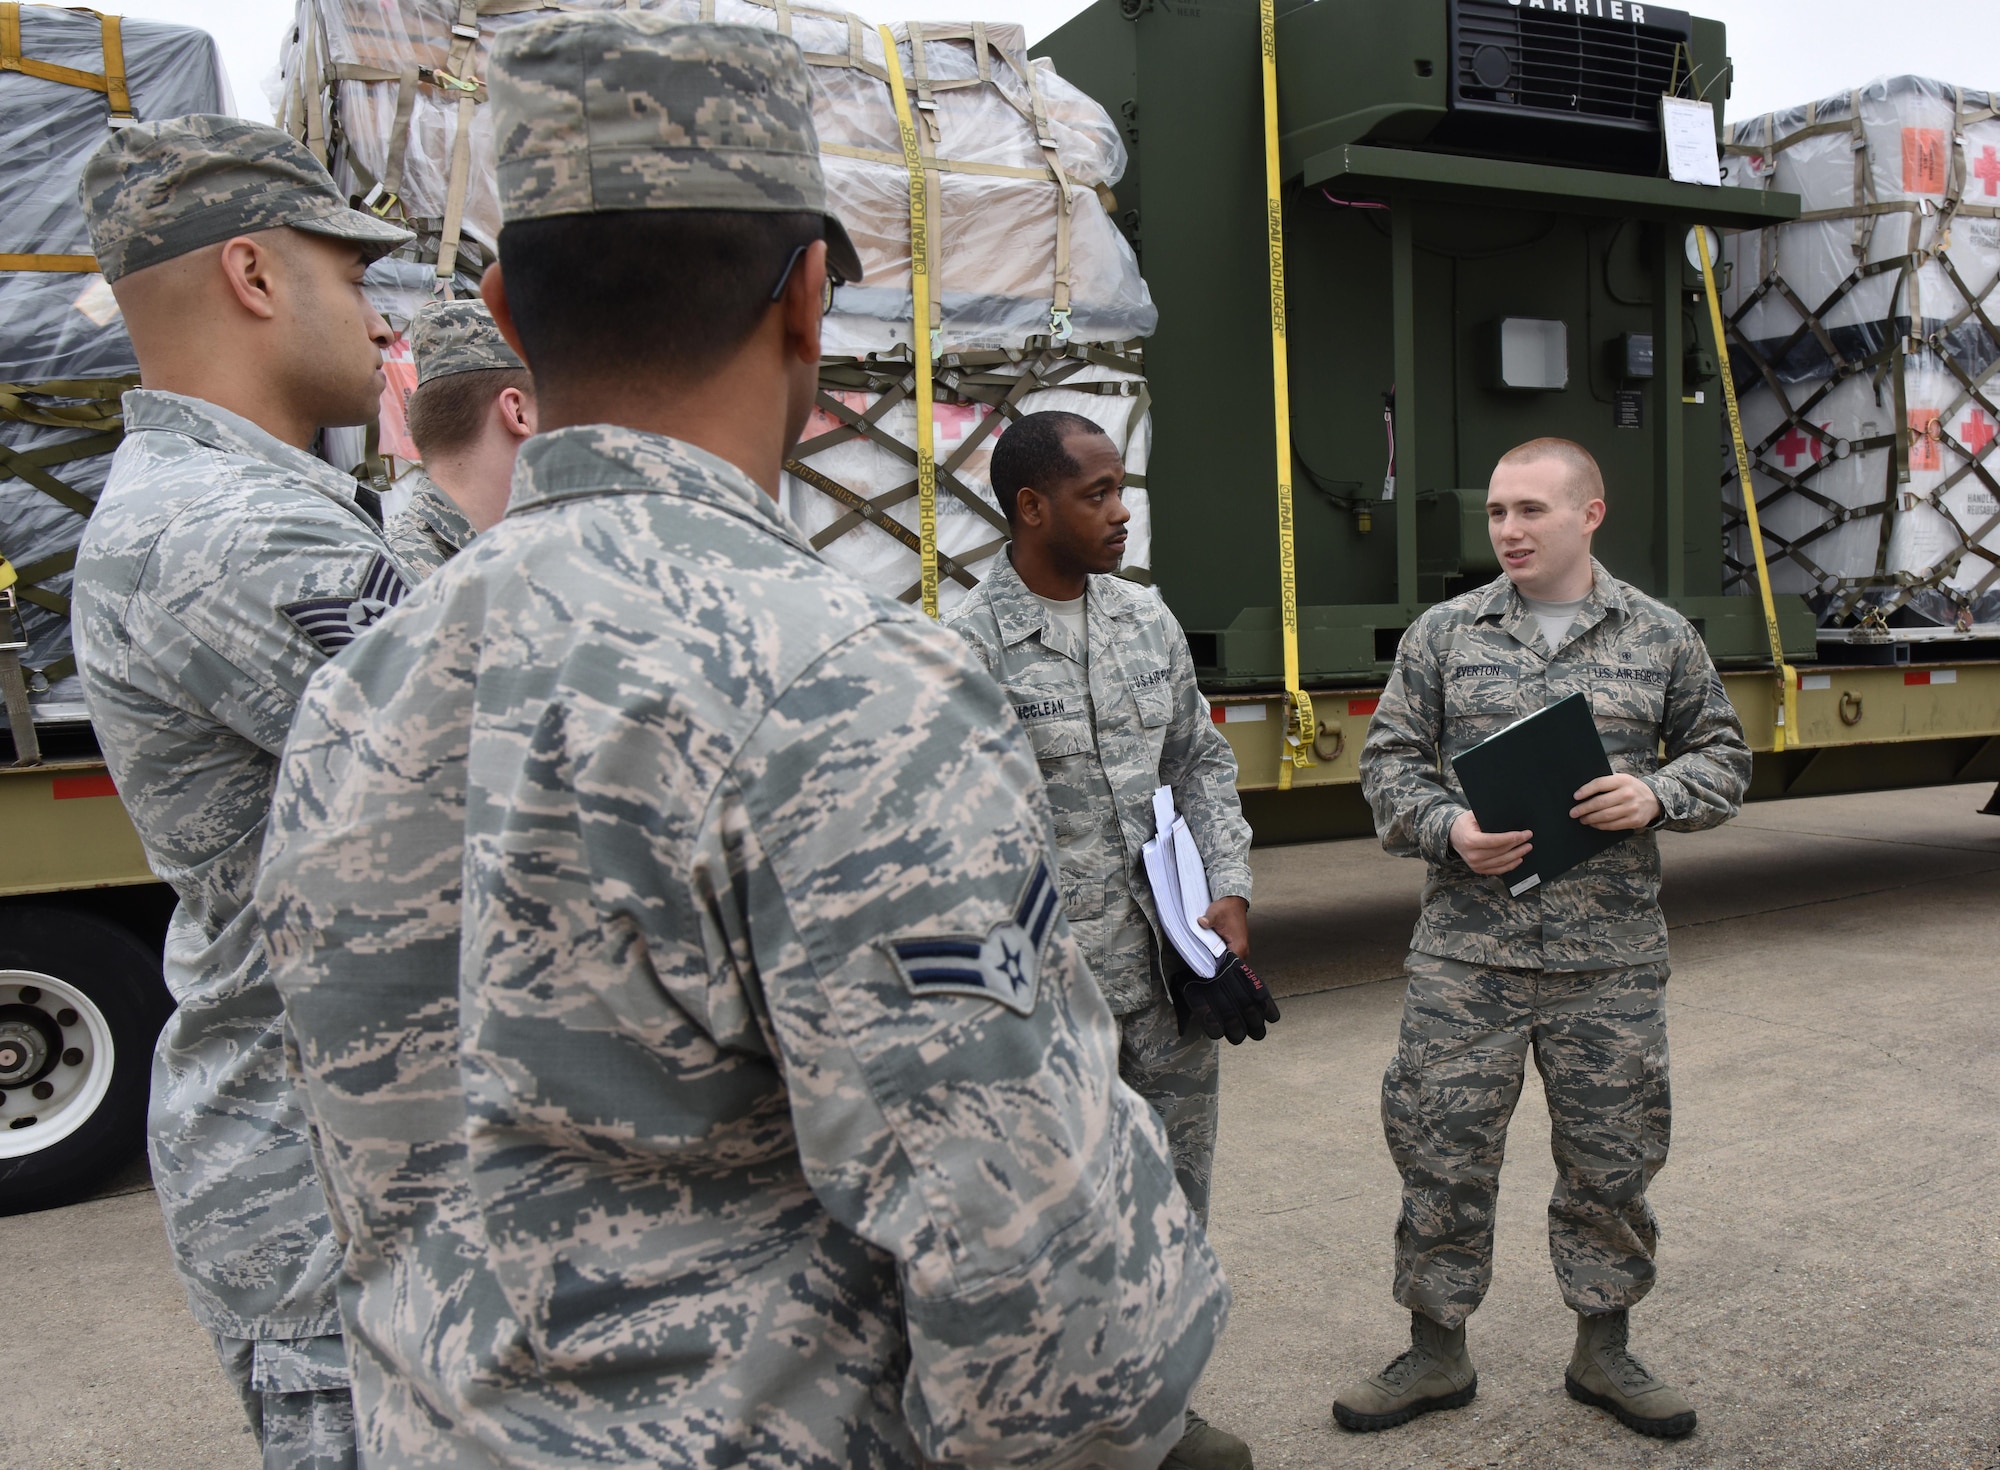 Medical logistics technicians from the 81st Medical Support Squadron participate in a deployment exercise at the supply warehouse loading docks Dec. 7, 2016, on Keesler Air Force Base, Miss. The exercise scenario tested the mission readiness of Team Keesler for simultaneous world-wide deployments. (U.S. Air Force photo by Kemberly Groue)